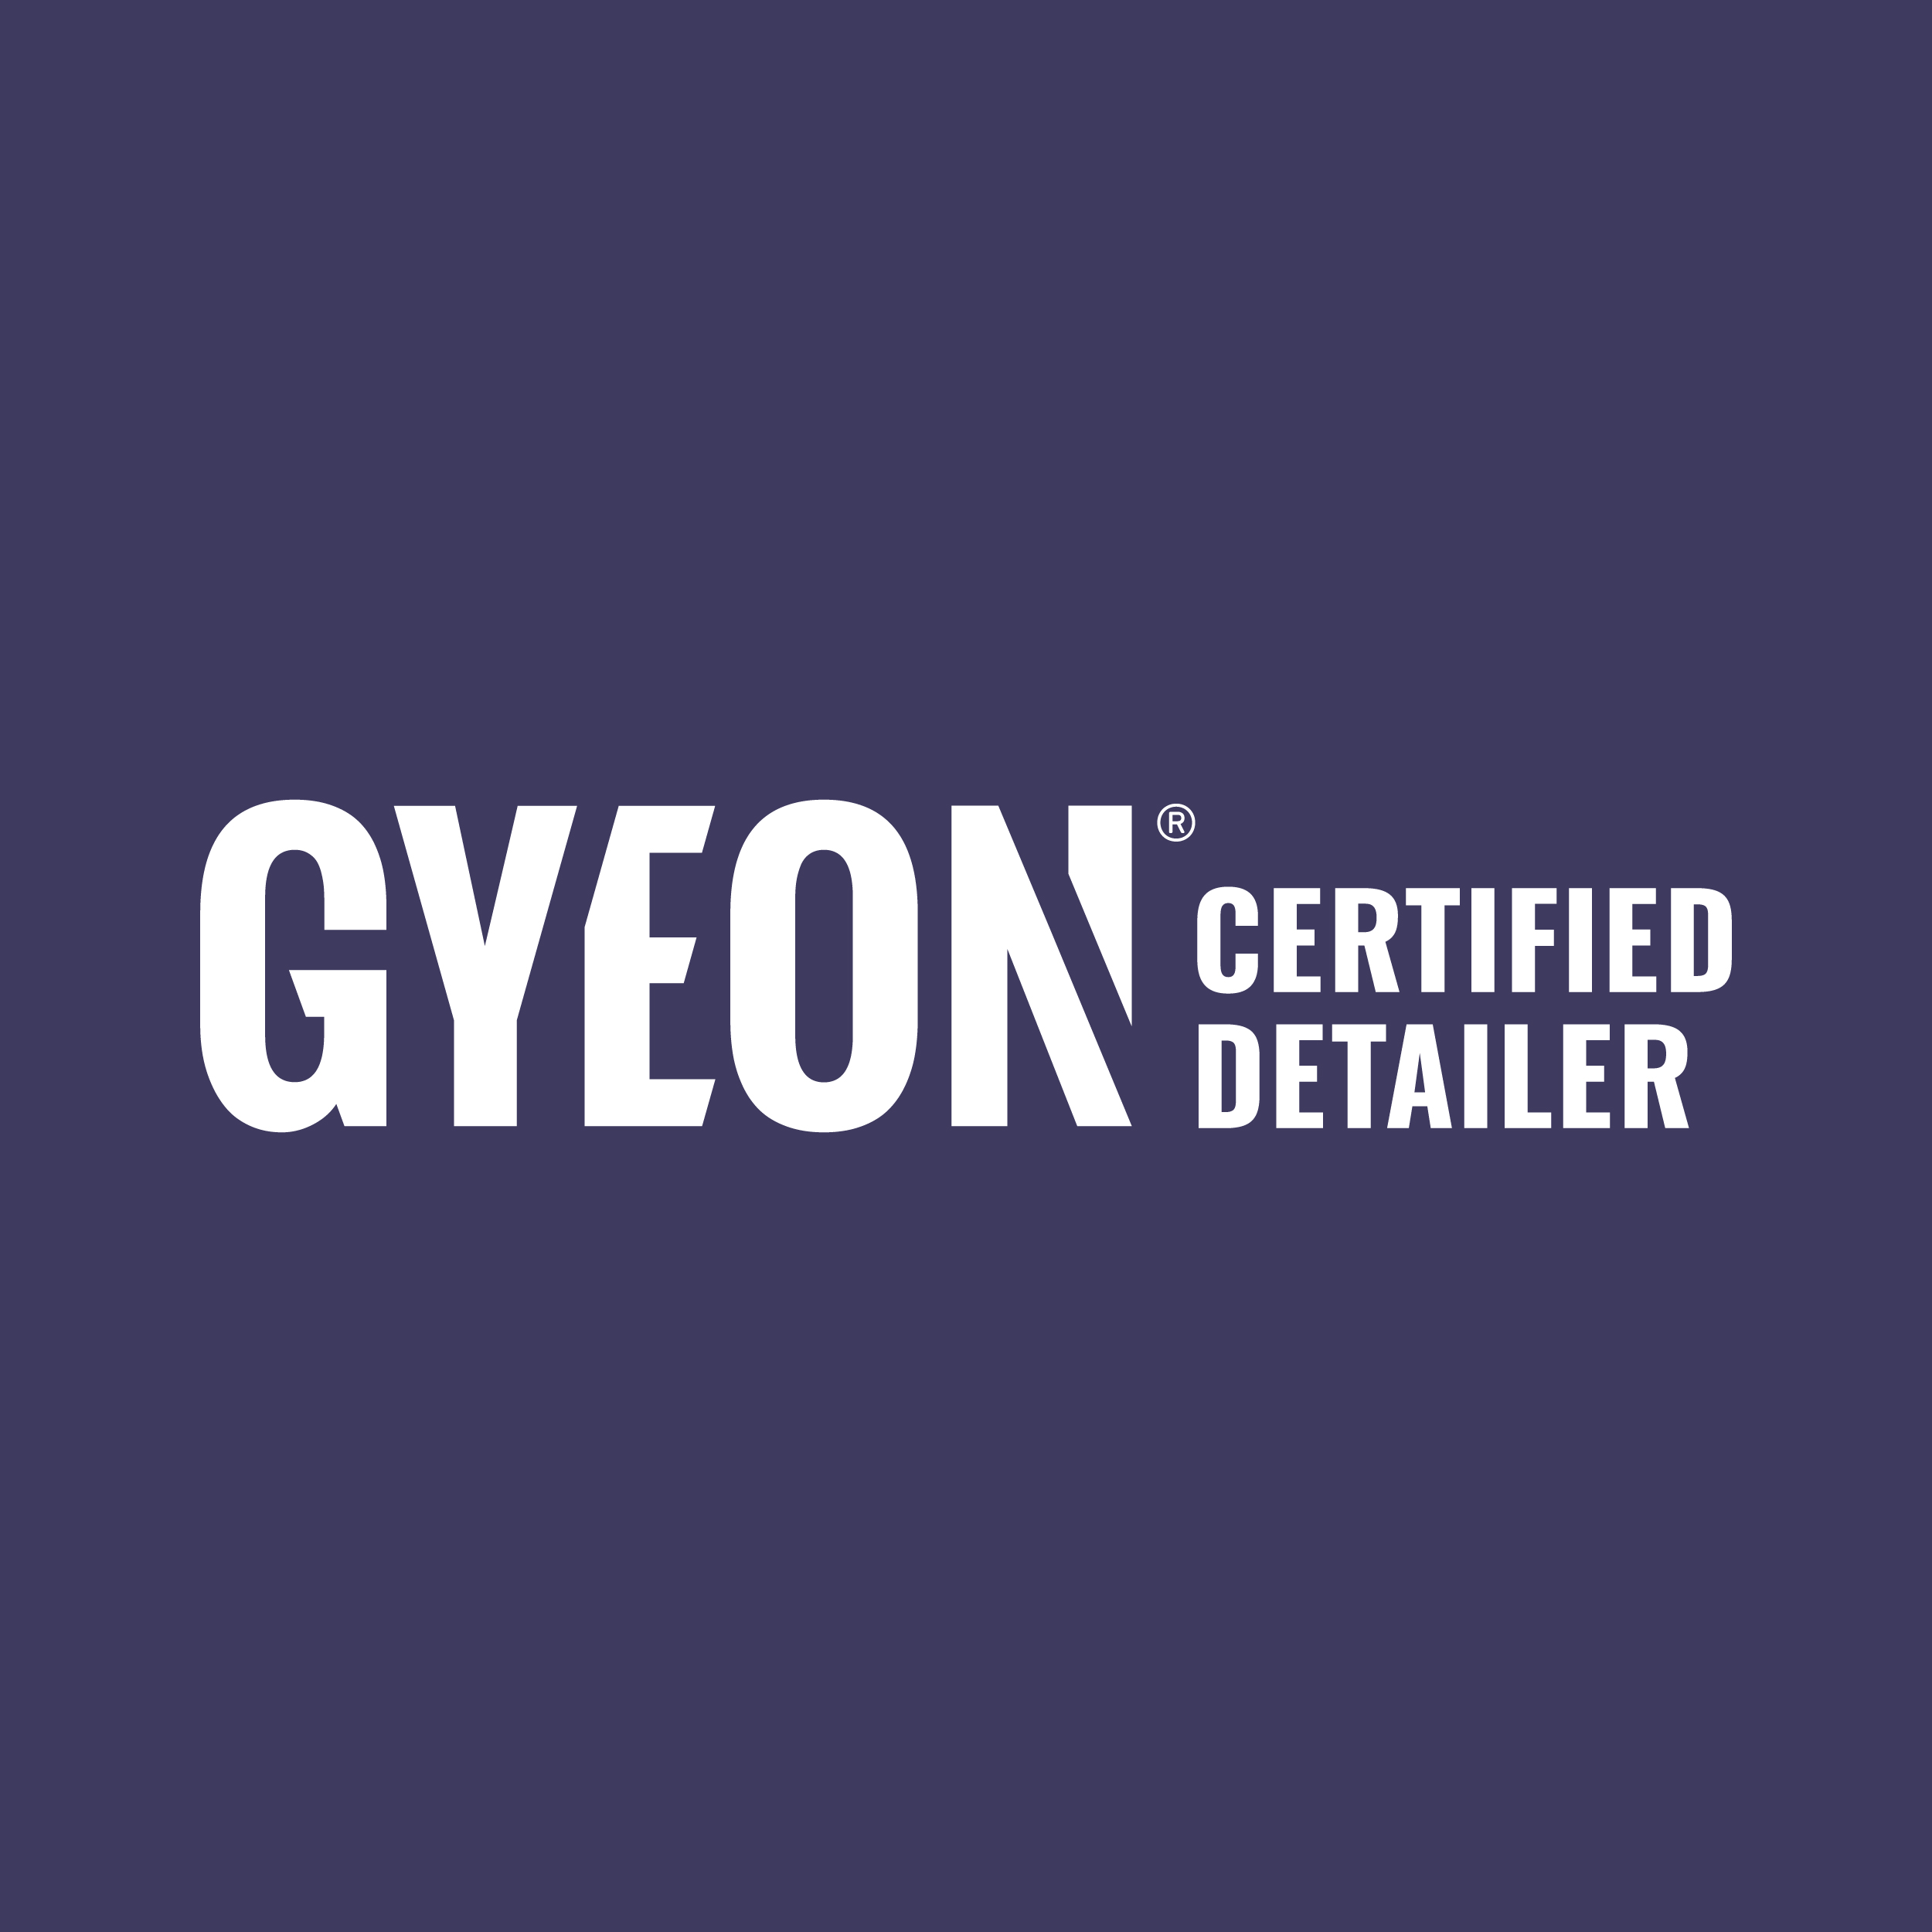 August Precision Becomes GYEON Certified Detailer